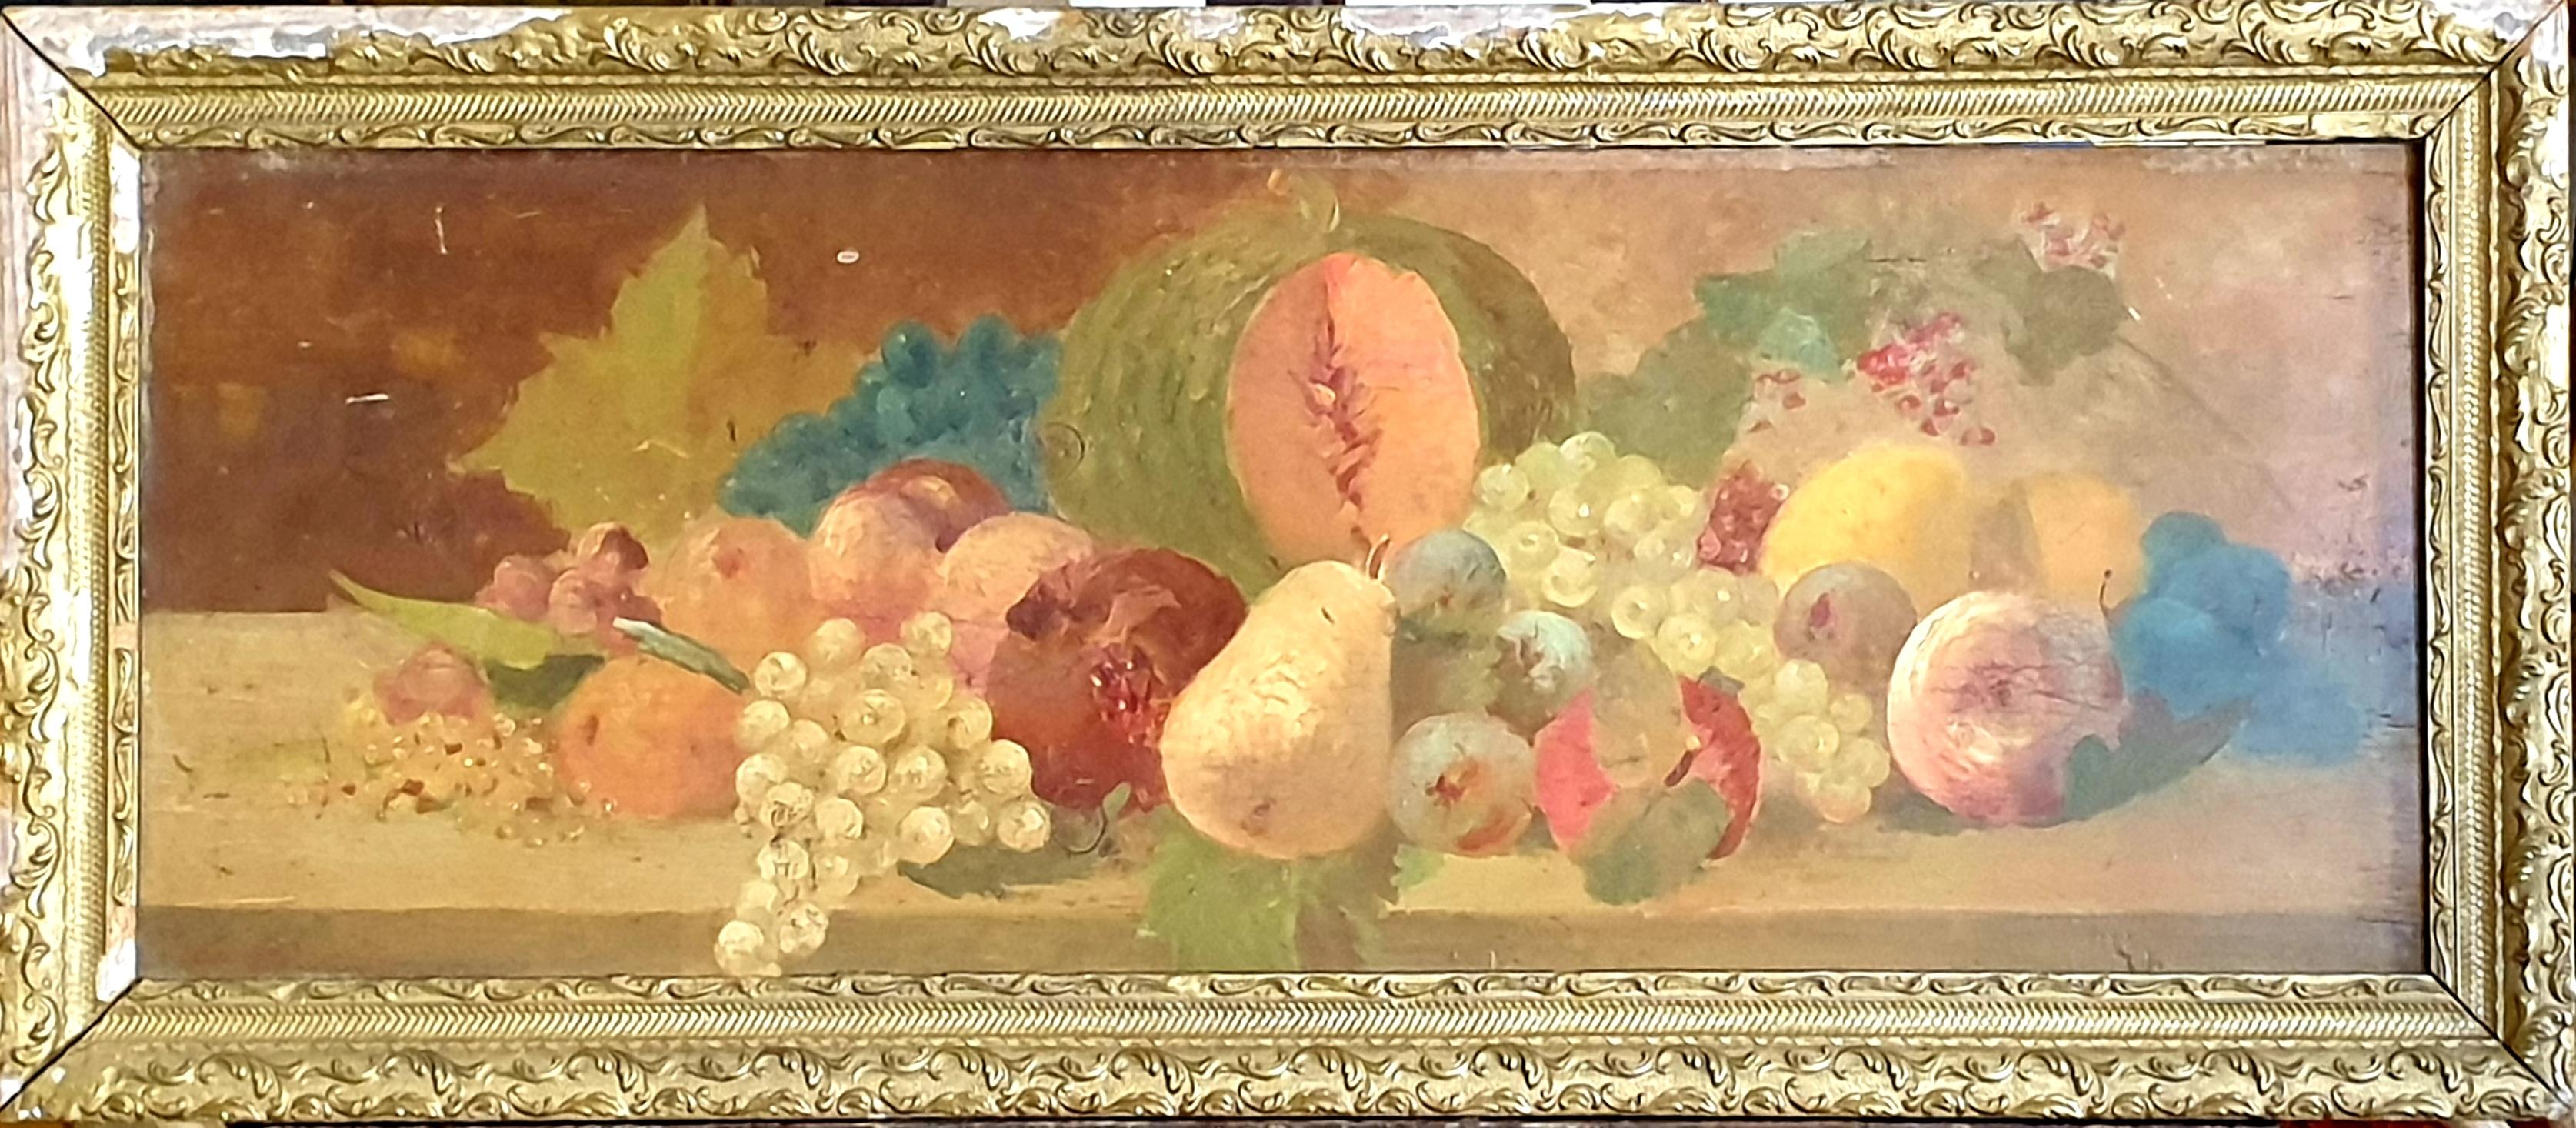 19th Century Overdoor Trumeau, Still Life Oil on Panel of a Cornucopia of Fruit. - Painting by Unknown